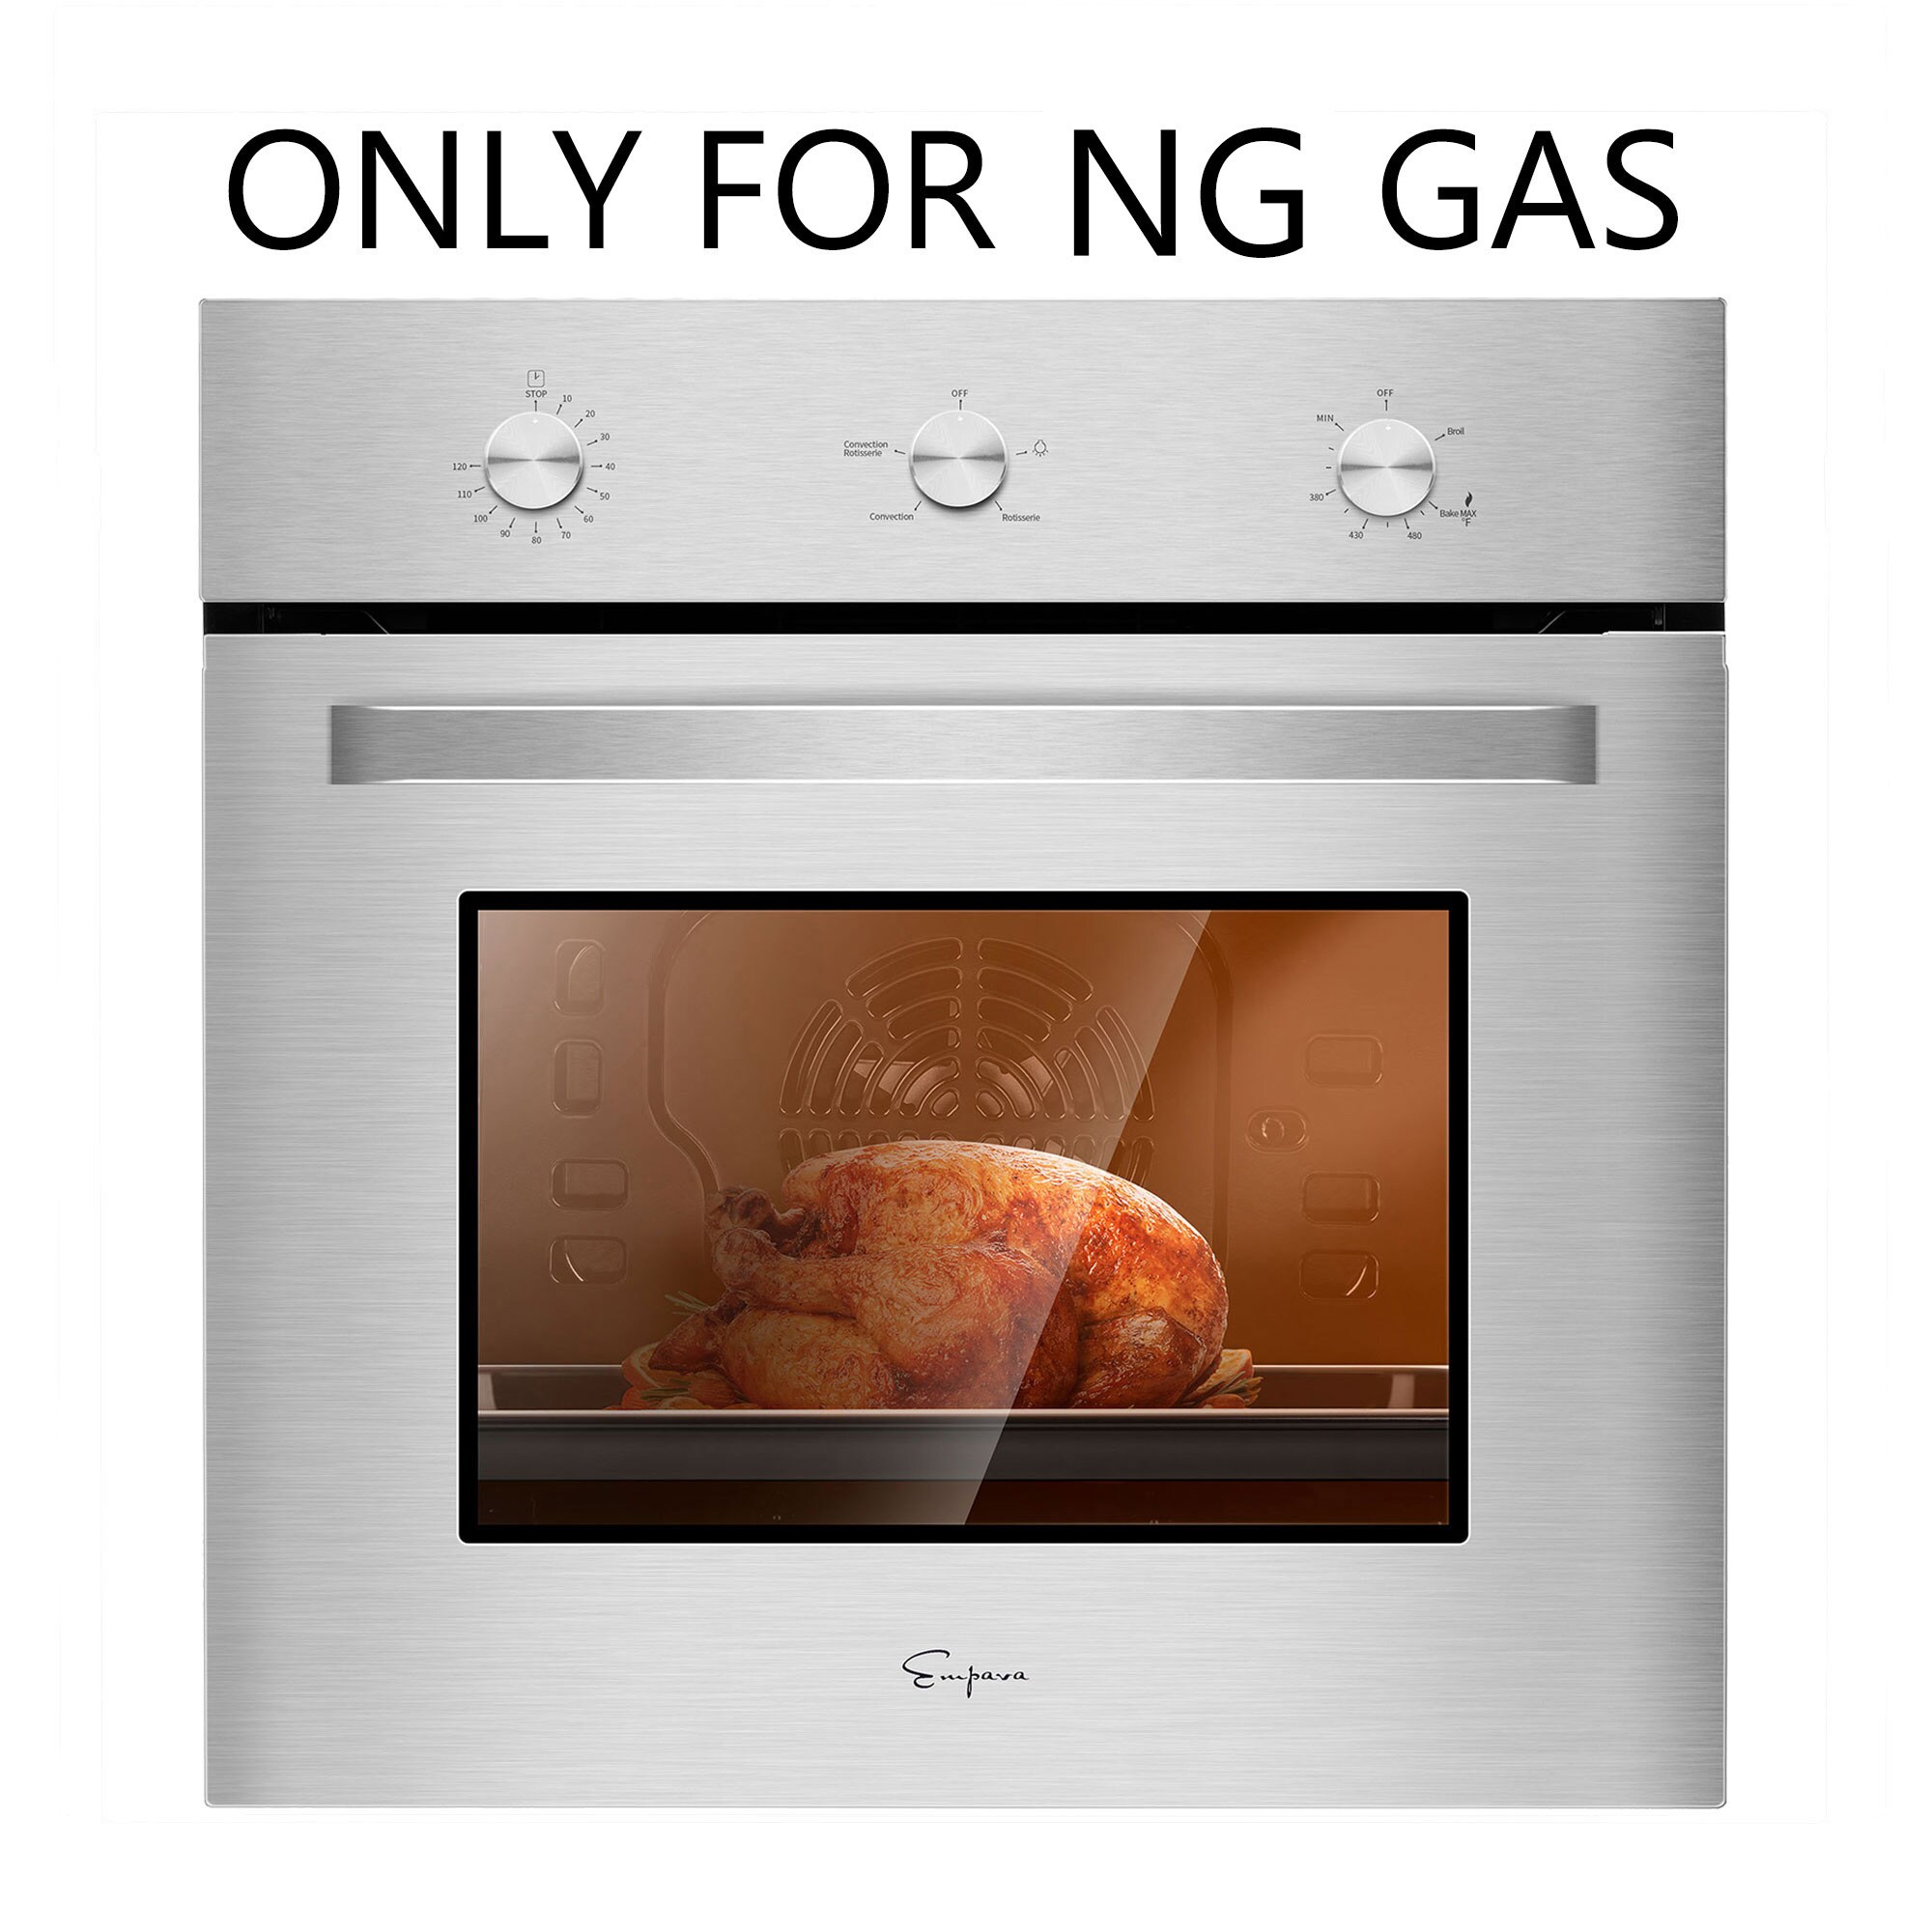 Empava 24-in Convection Single Gas Wall Oven in Stainless Steel